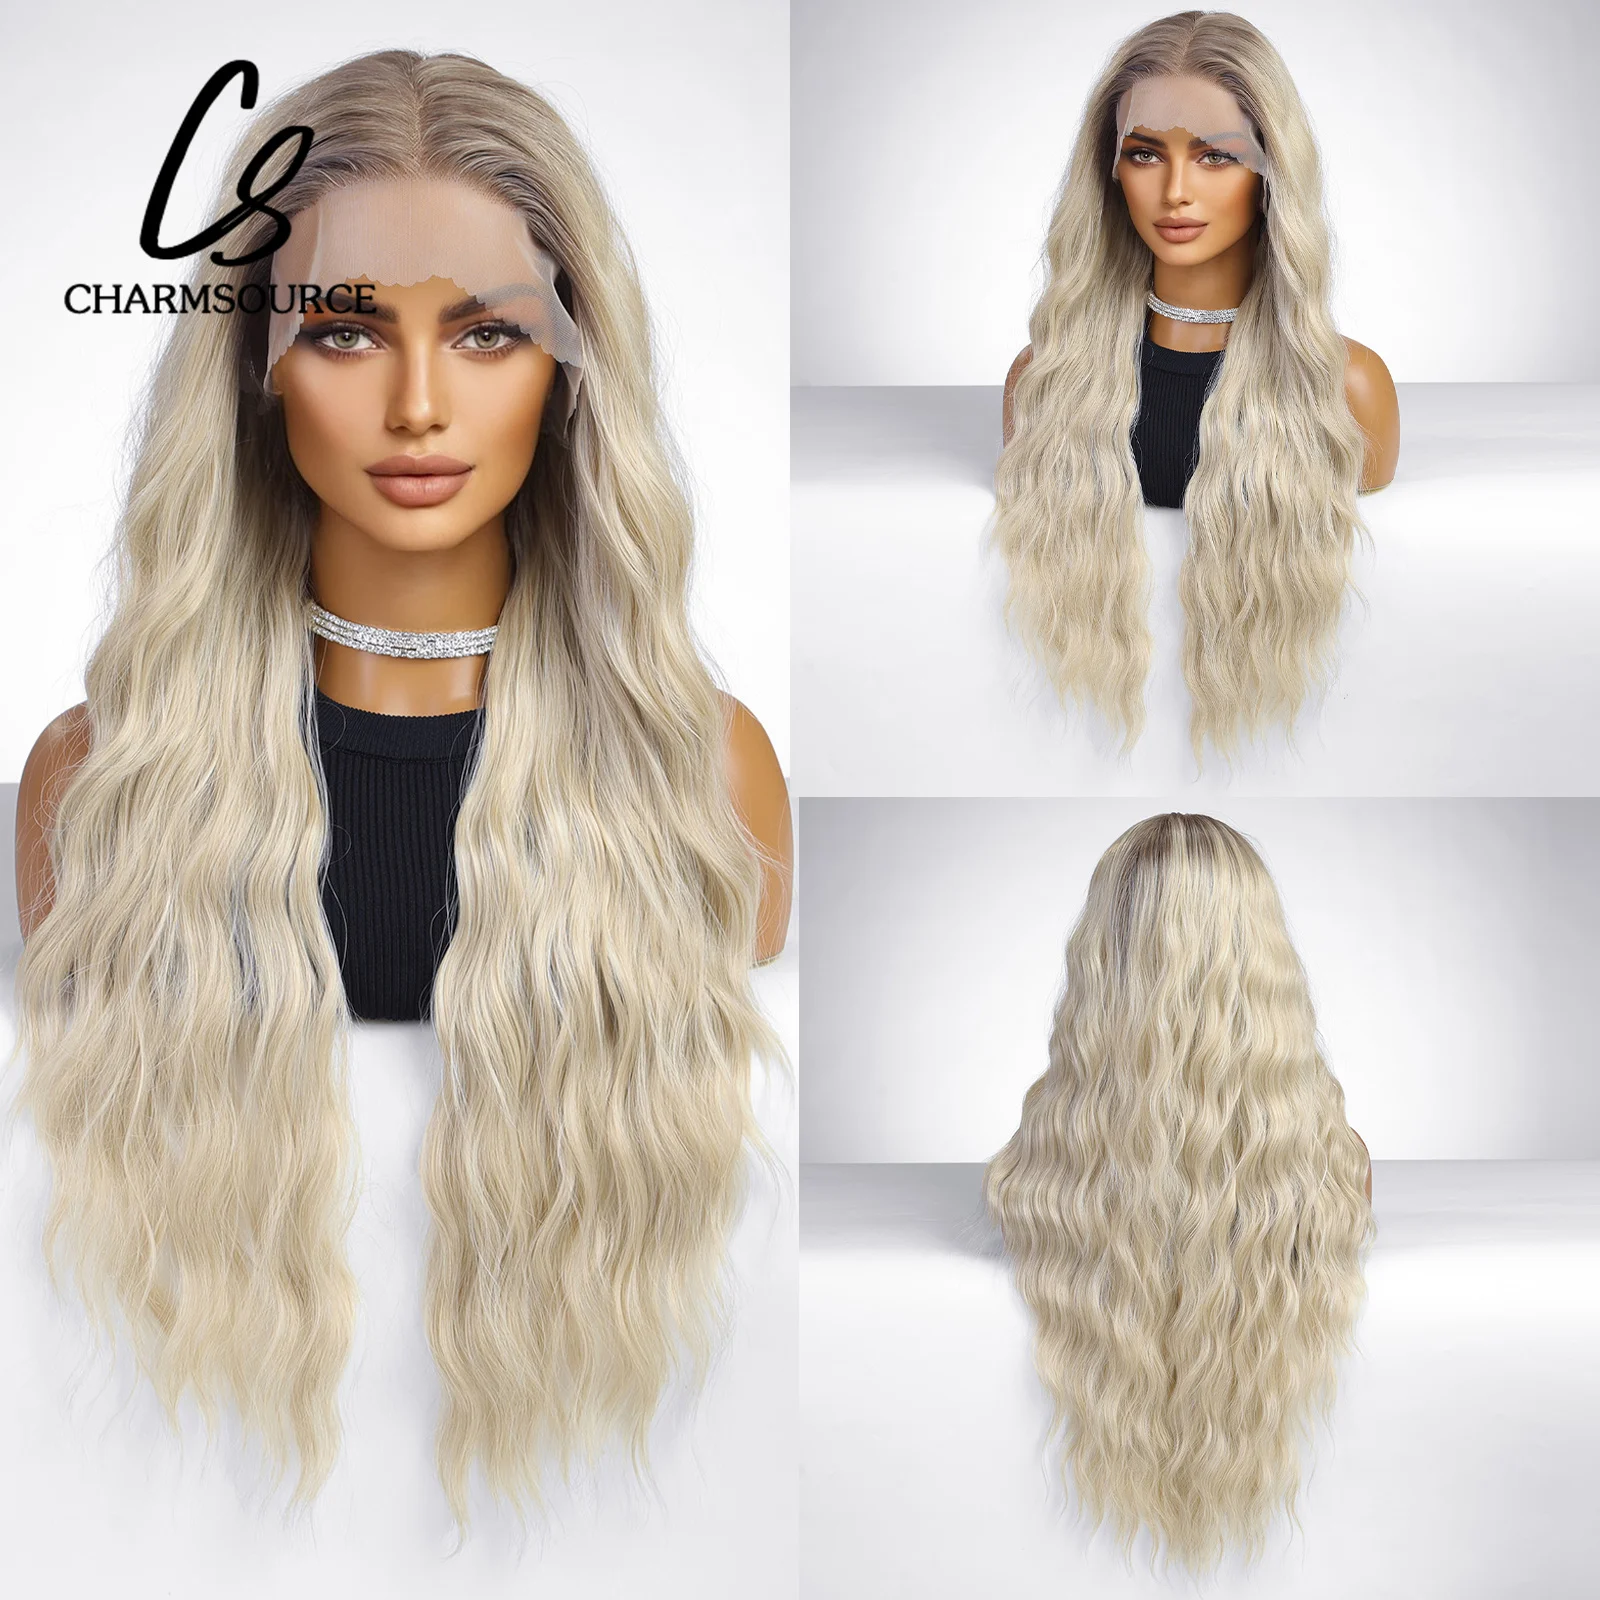 

CharmSource 13x4 Lace Front Wigs Blonde Synthetic Long Wavy Curly Wigs for Women Cosplay High Density Hair Wig